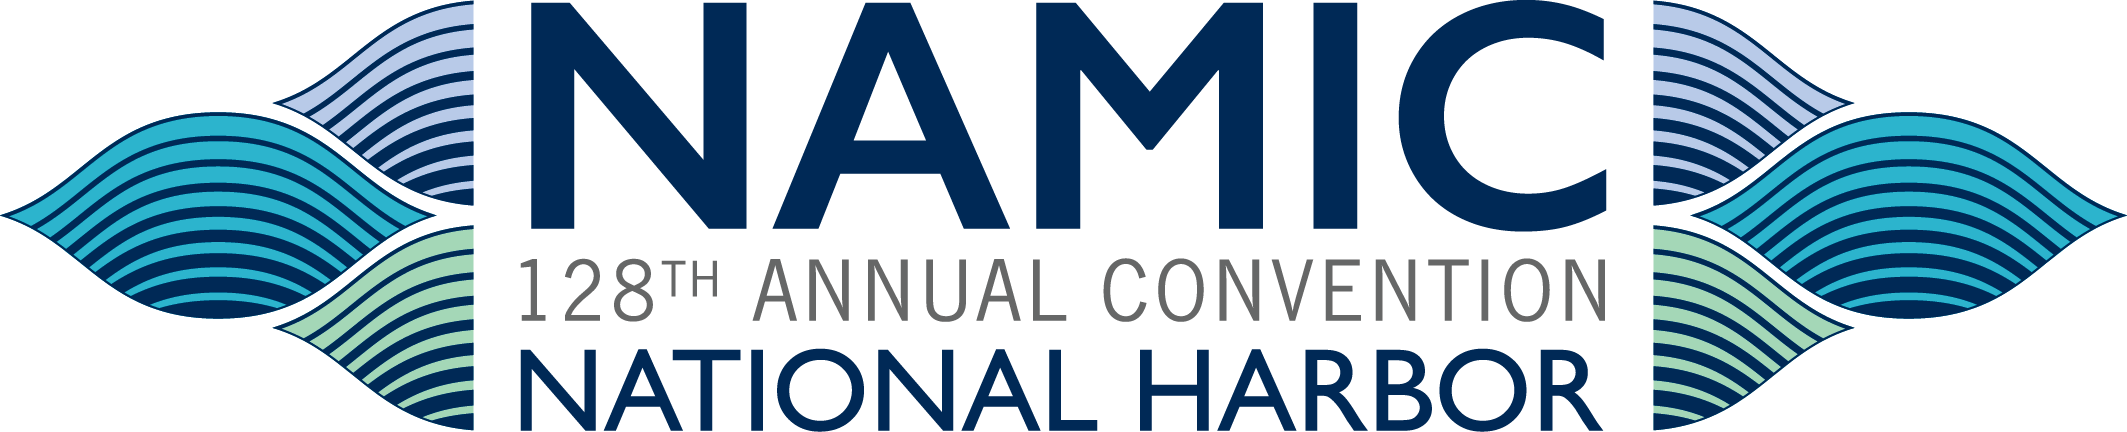 NAMIC 128th Annual Convention National Harbor